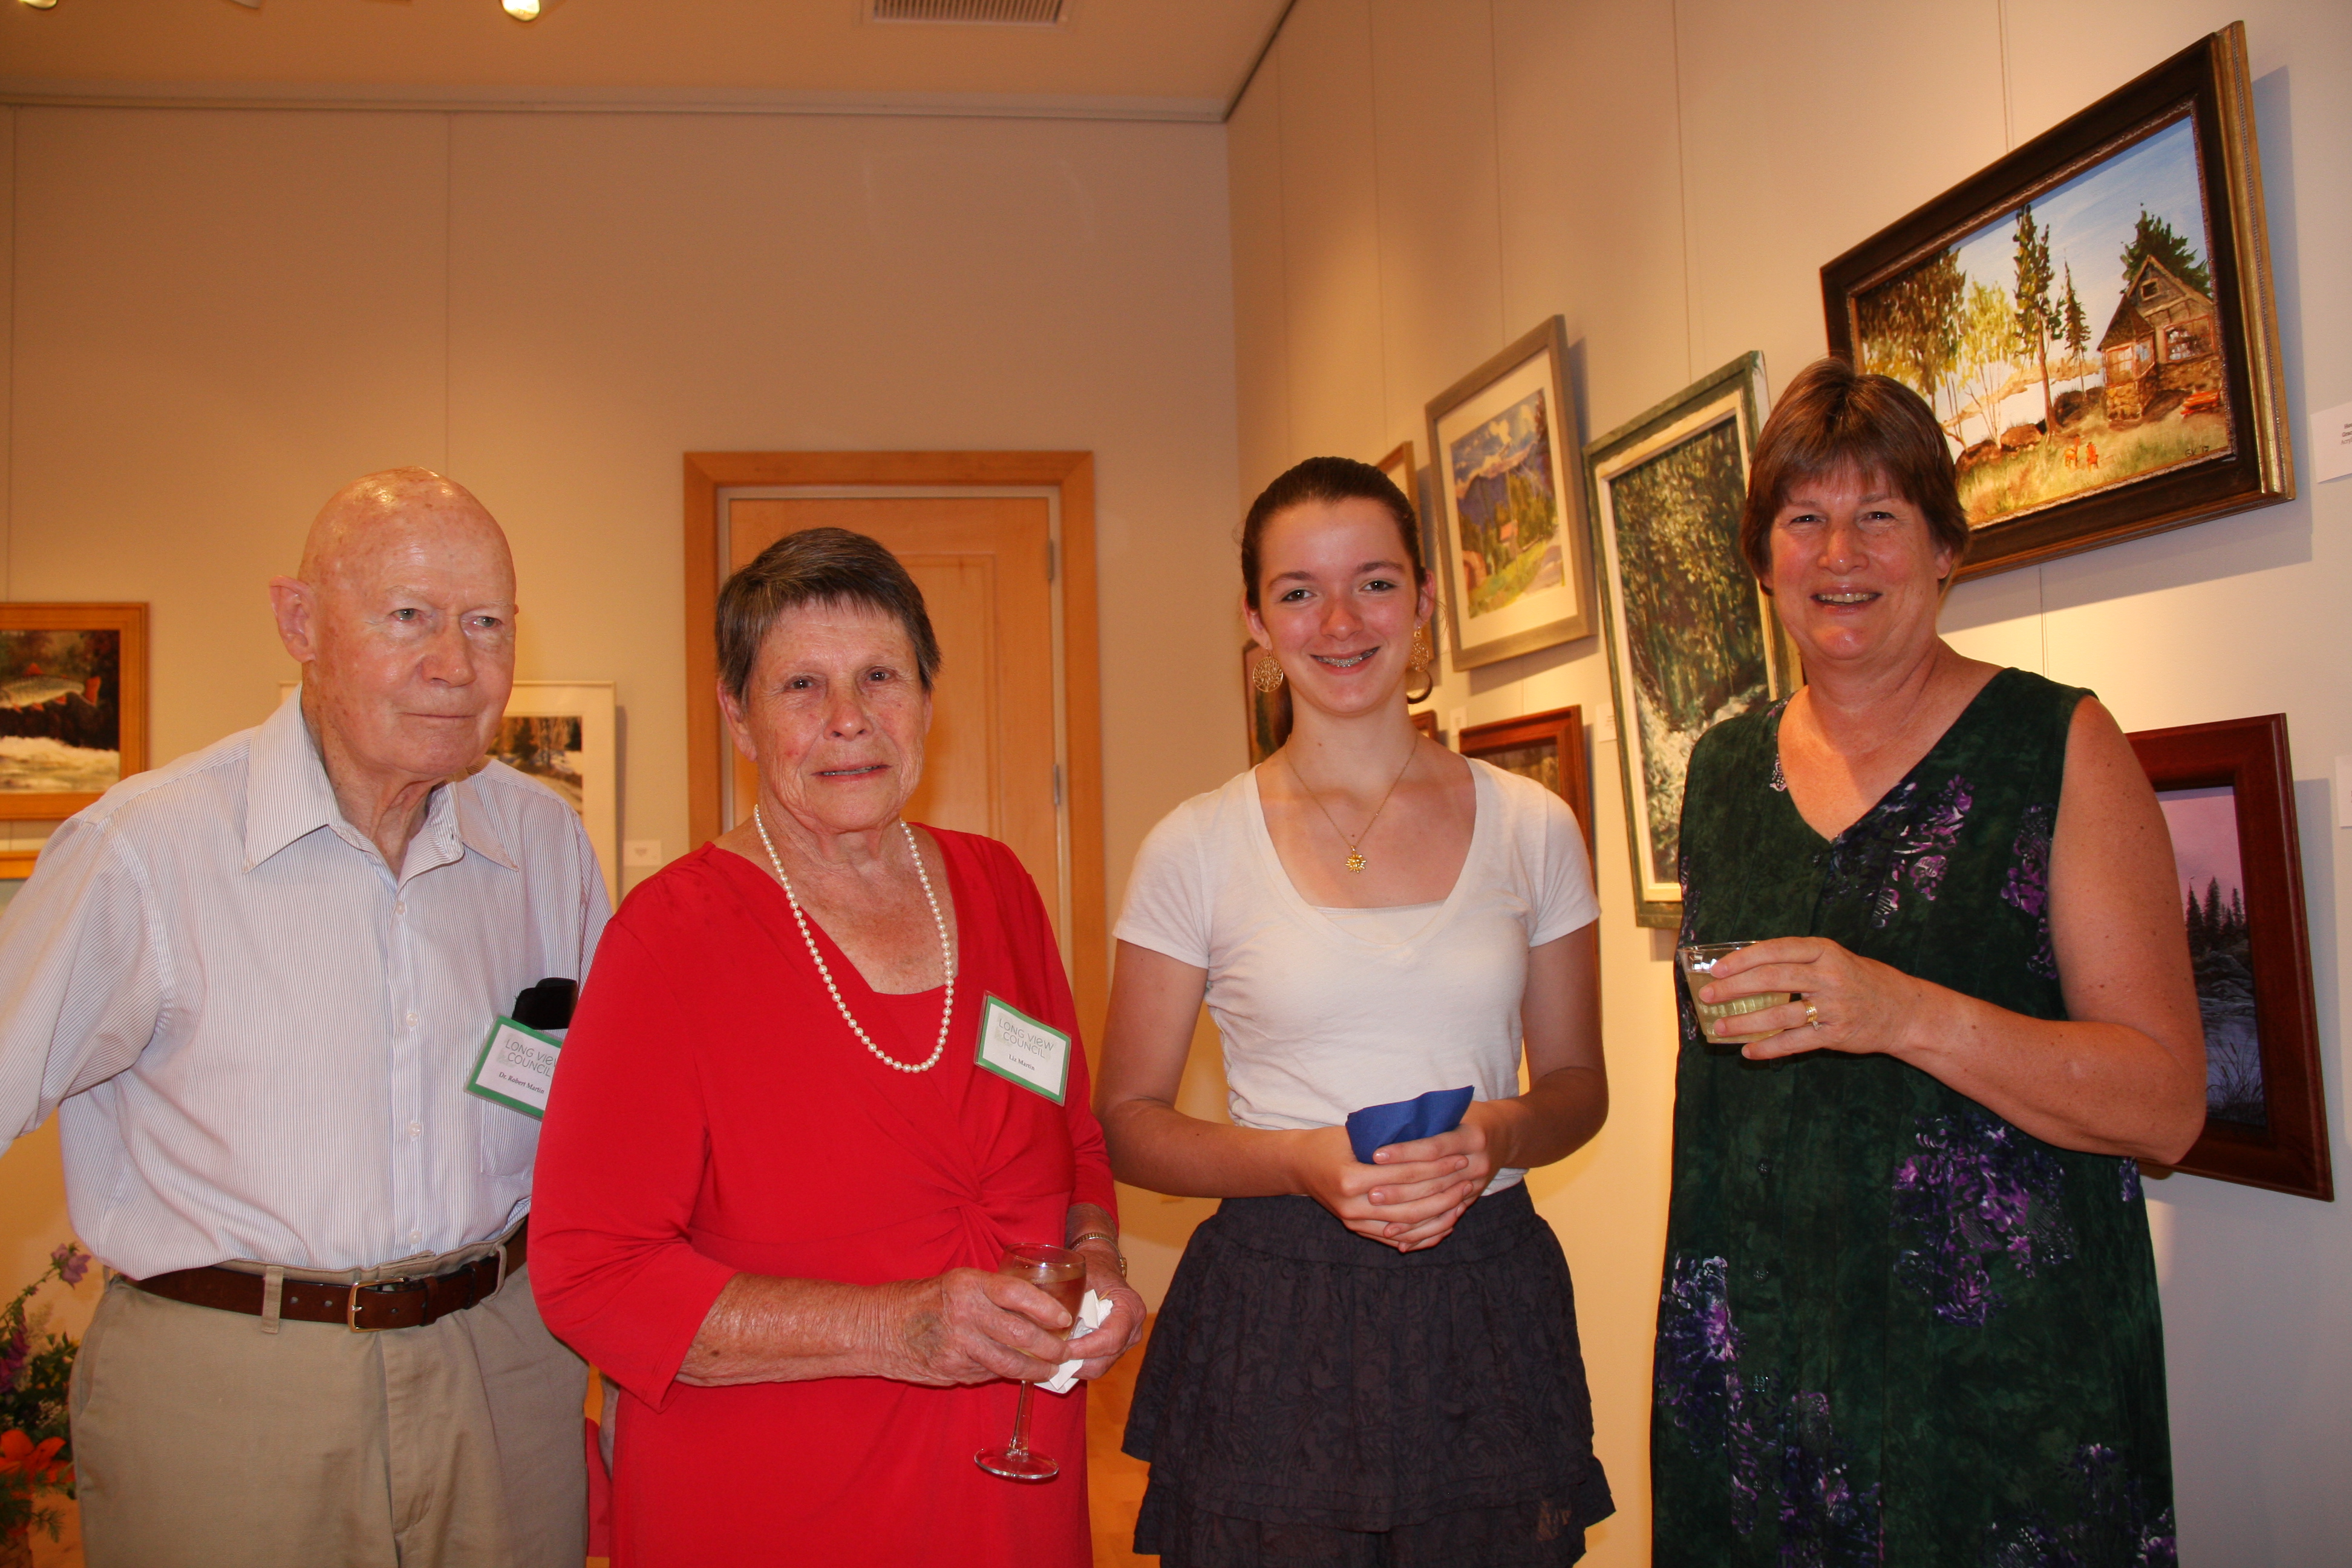 Dr. Robert and Liz Martin with granddaughter Catherine Reynolds, and daughter Claire Bareiss